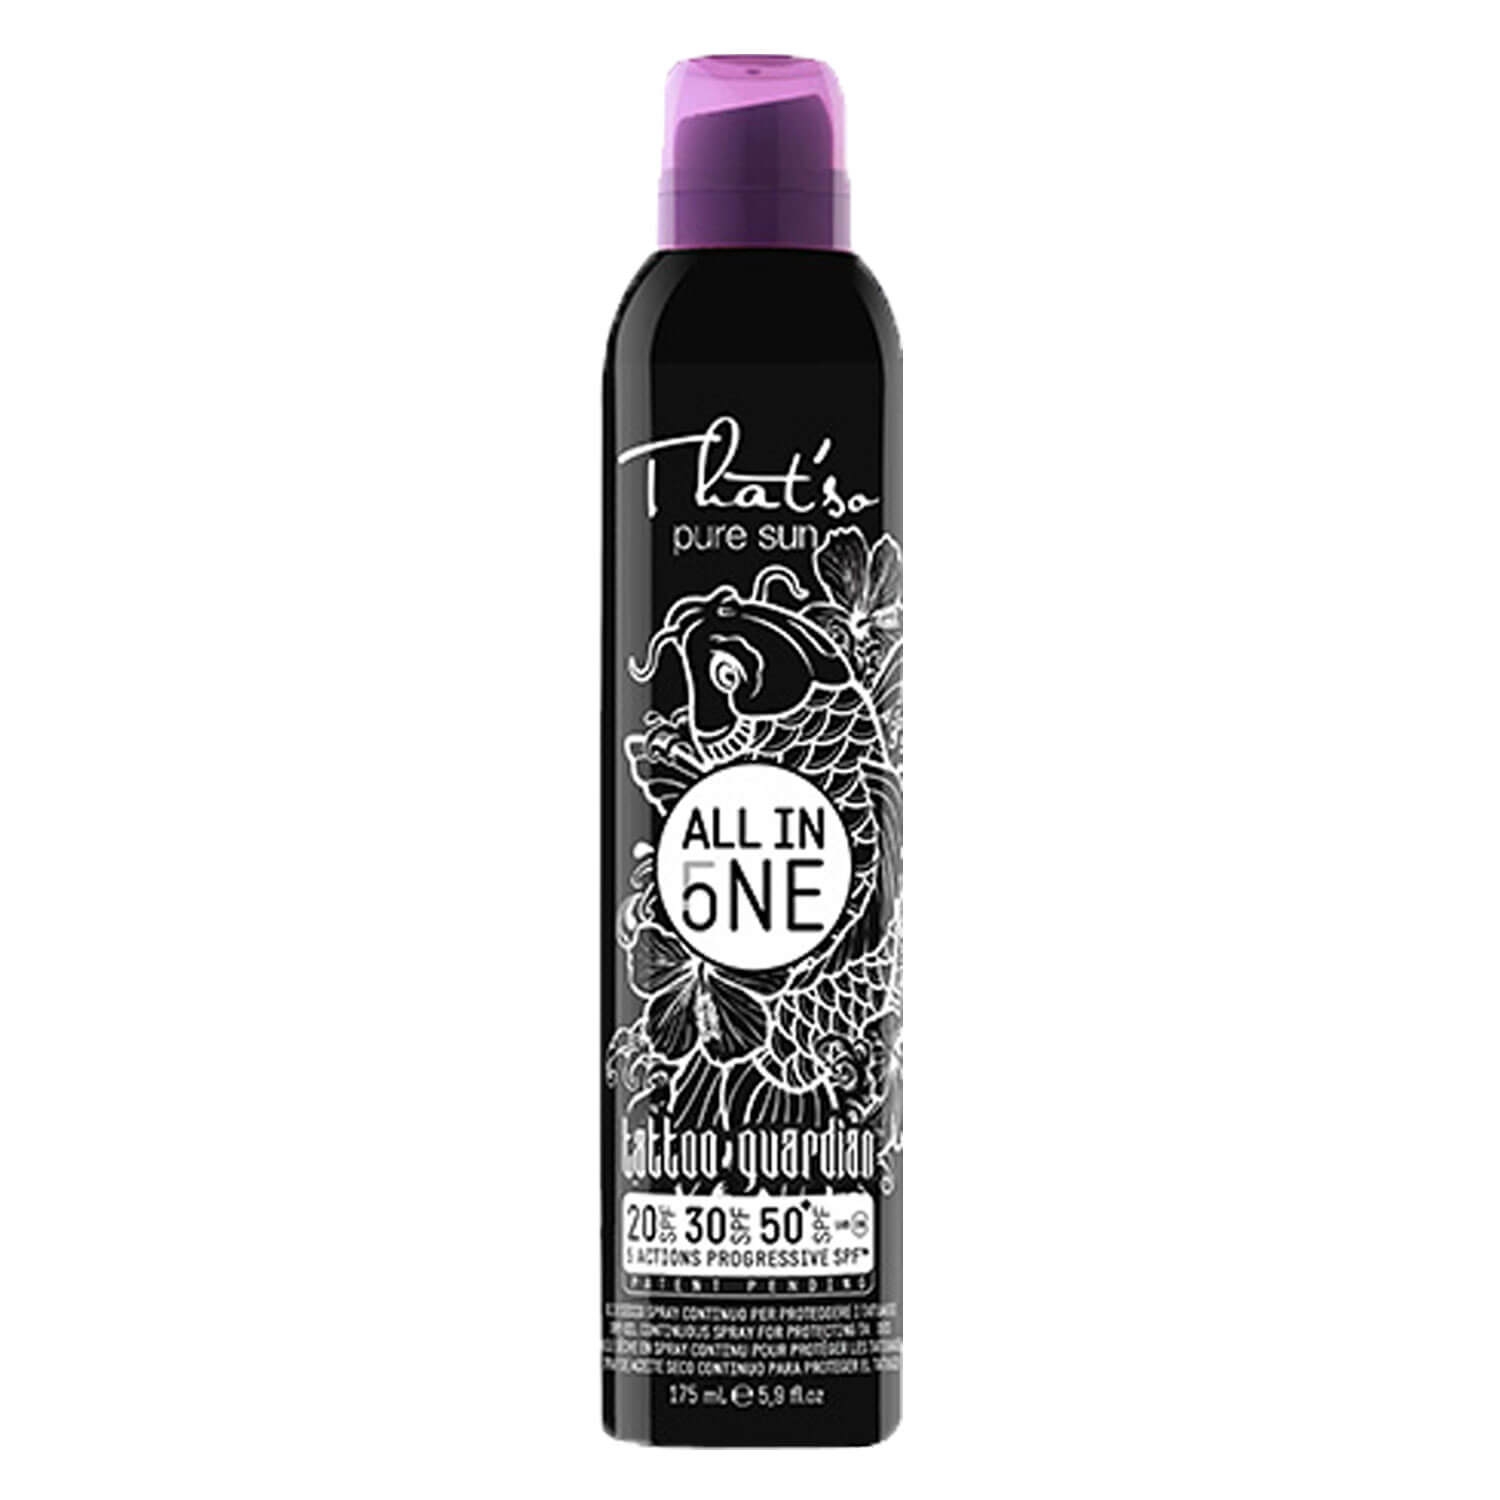 Product image from That'so - ALL IN ONE TATTOO GUARDIAN SPF 20/30*/50+*